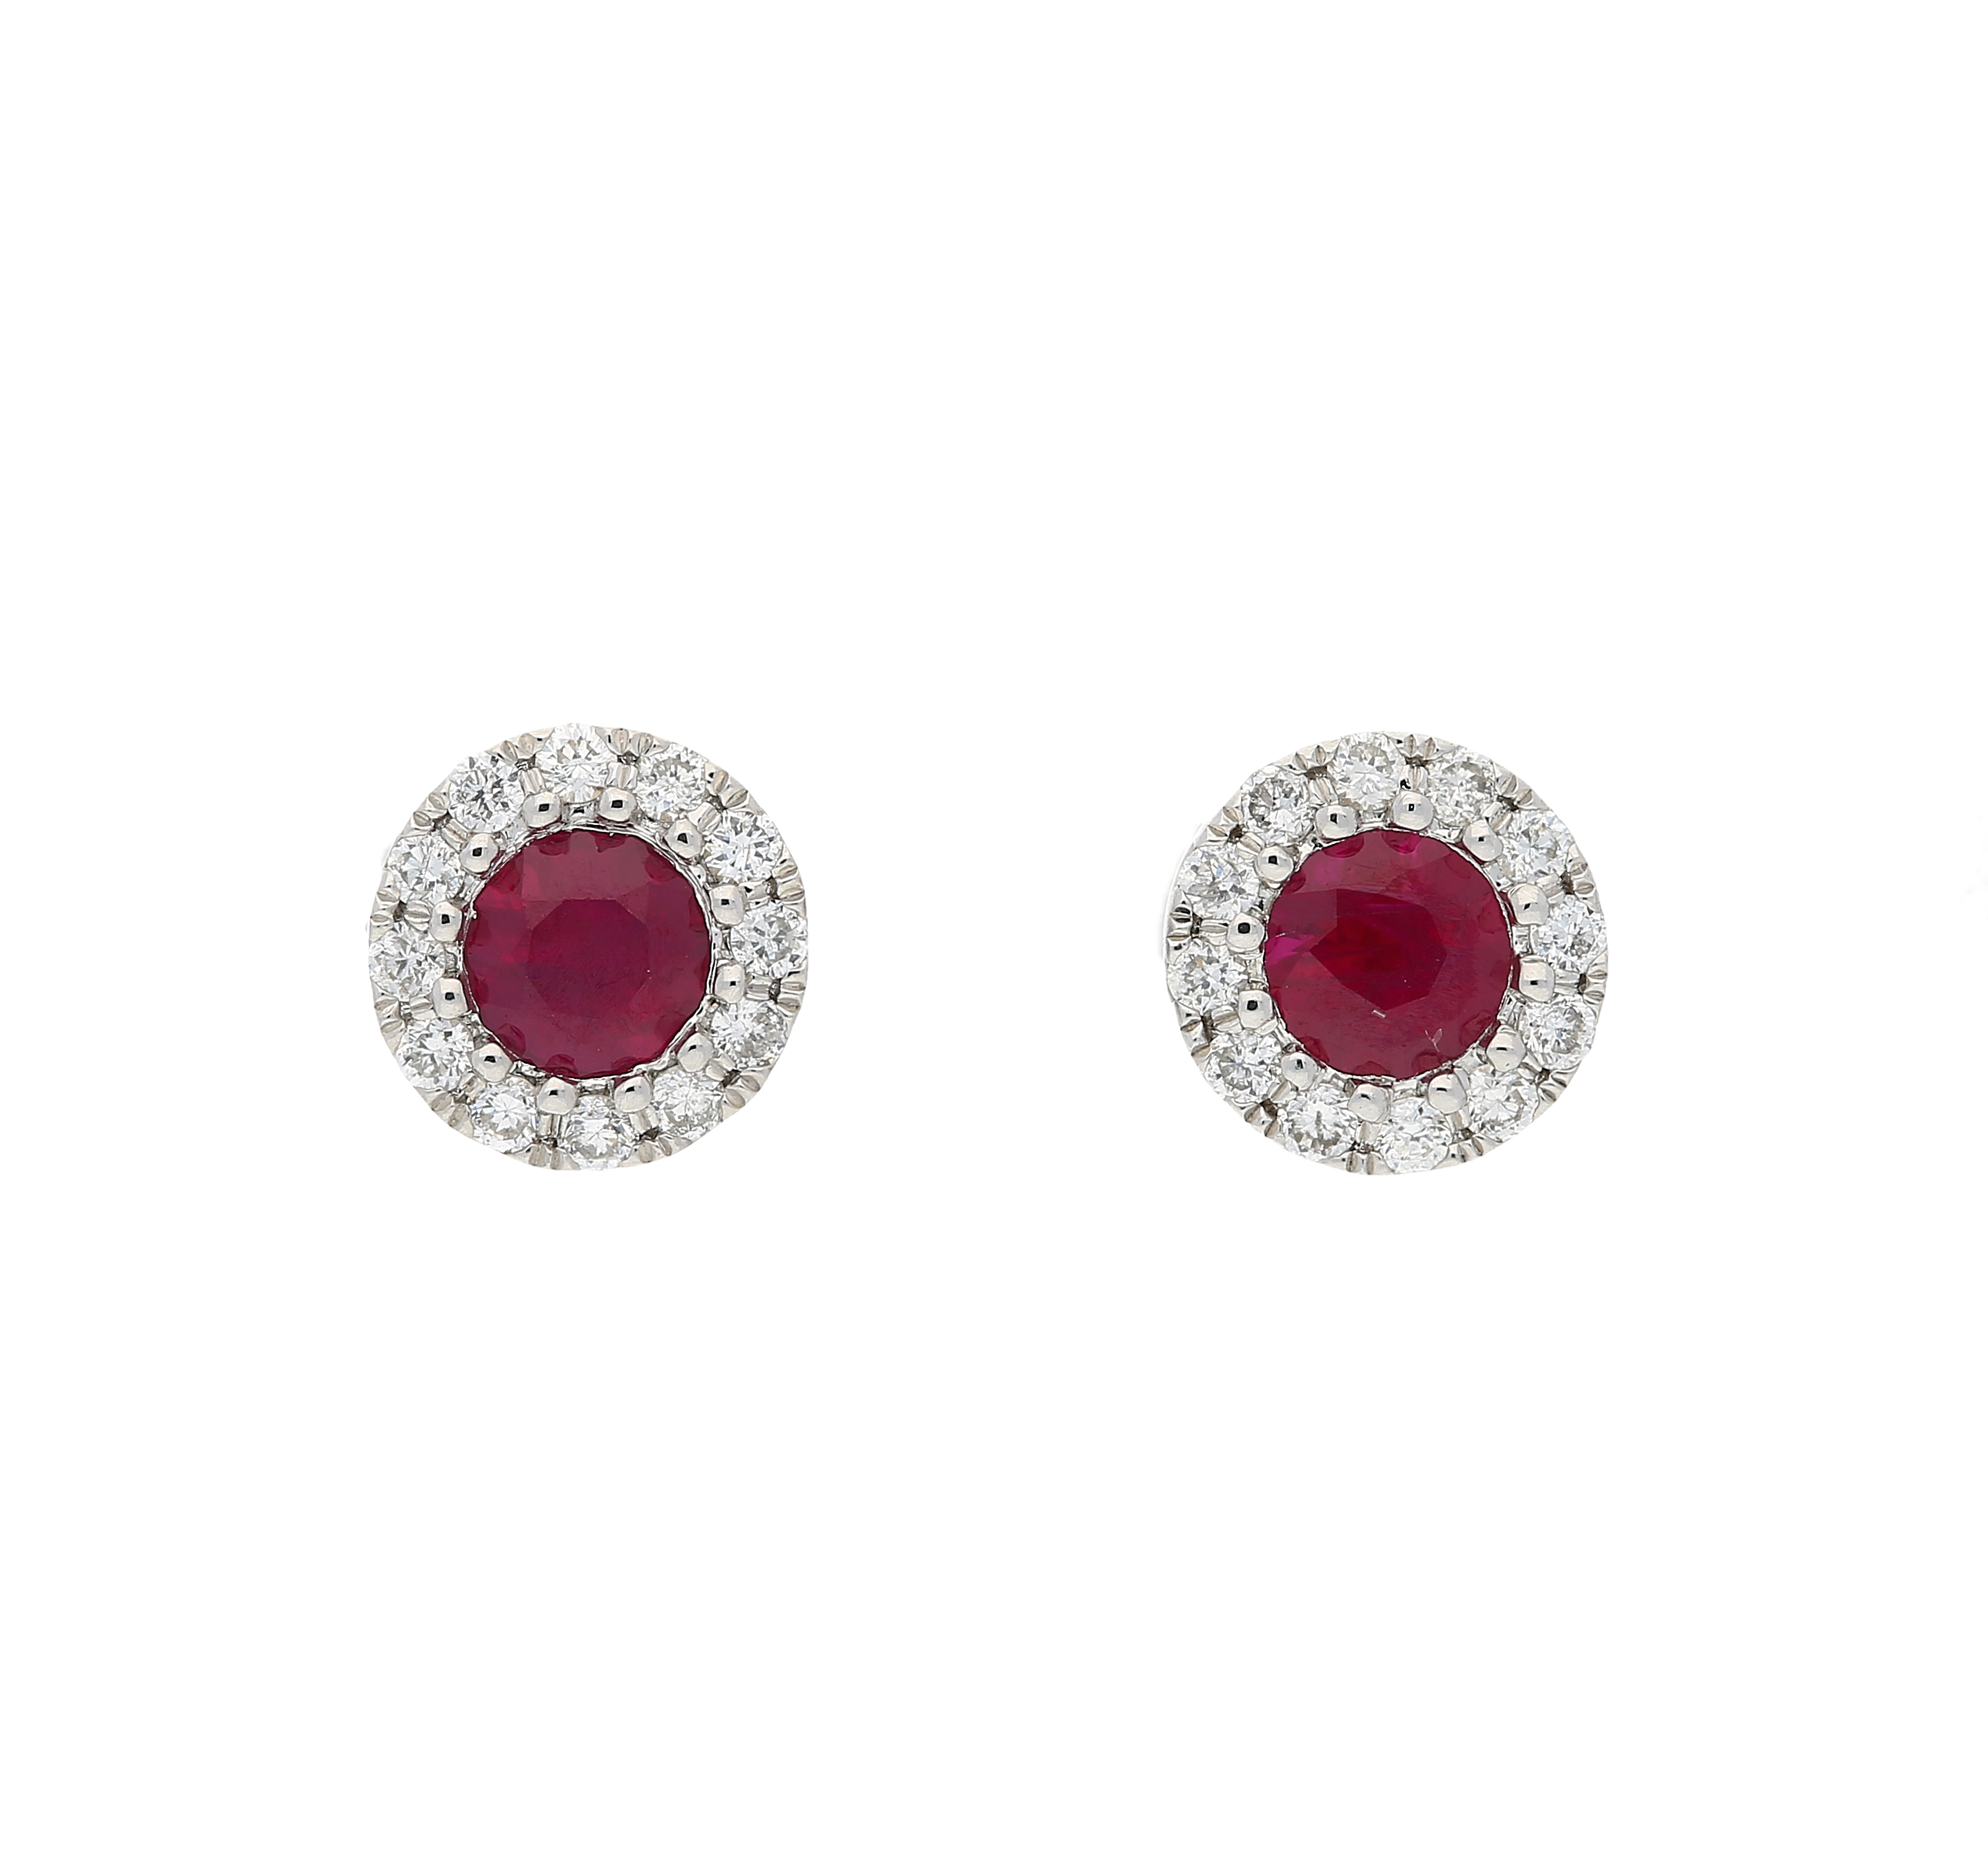 winsor bishop 14ct white gold diamond and ruby earrings PMXLACX